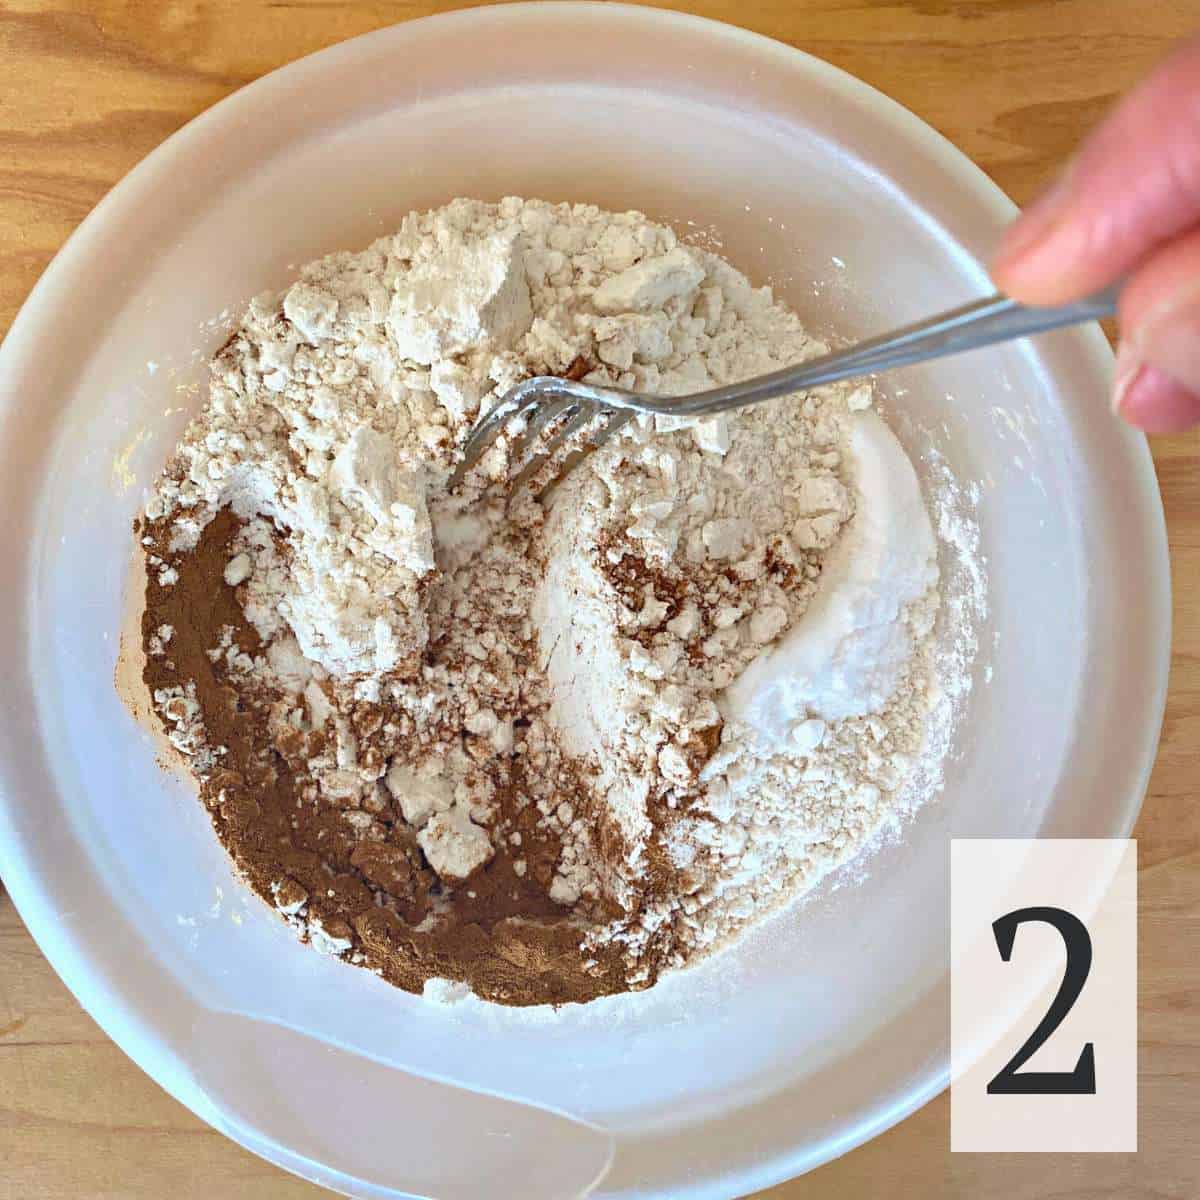 Gluten free flour, cinnamon, baking powder, baking soda, and salt being mixed with a fork in a bowl.